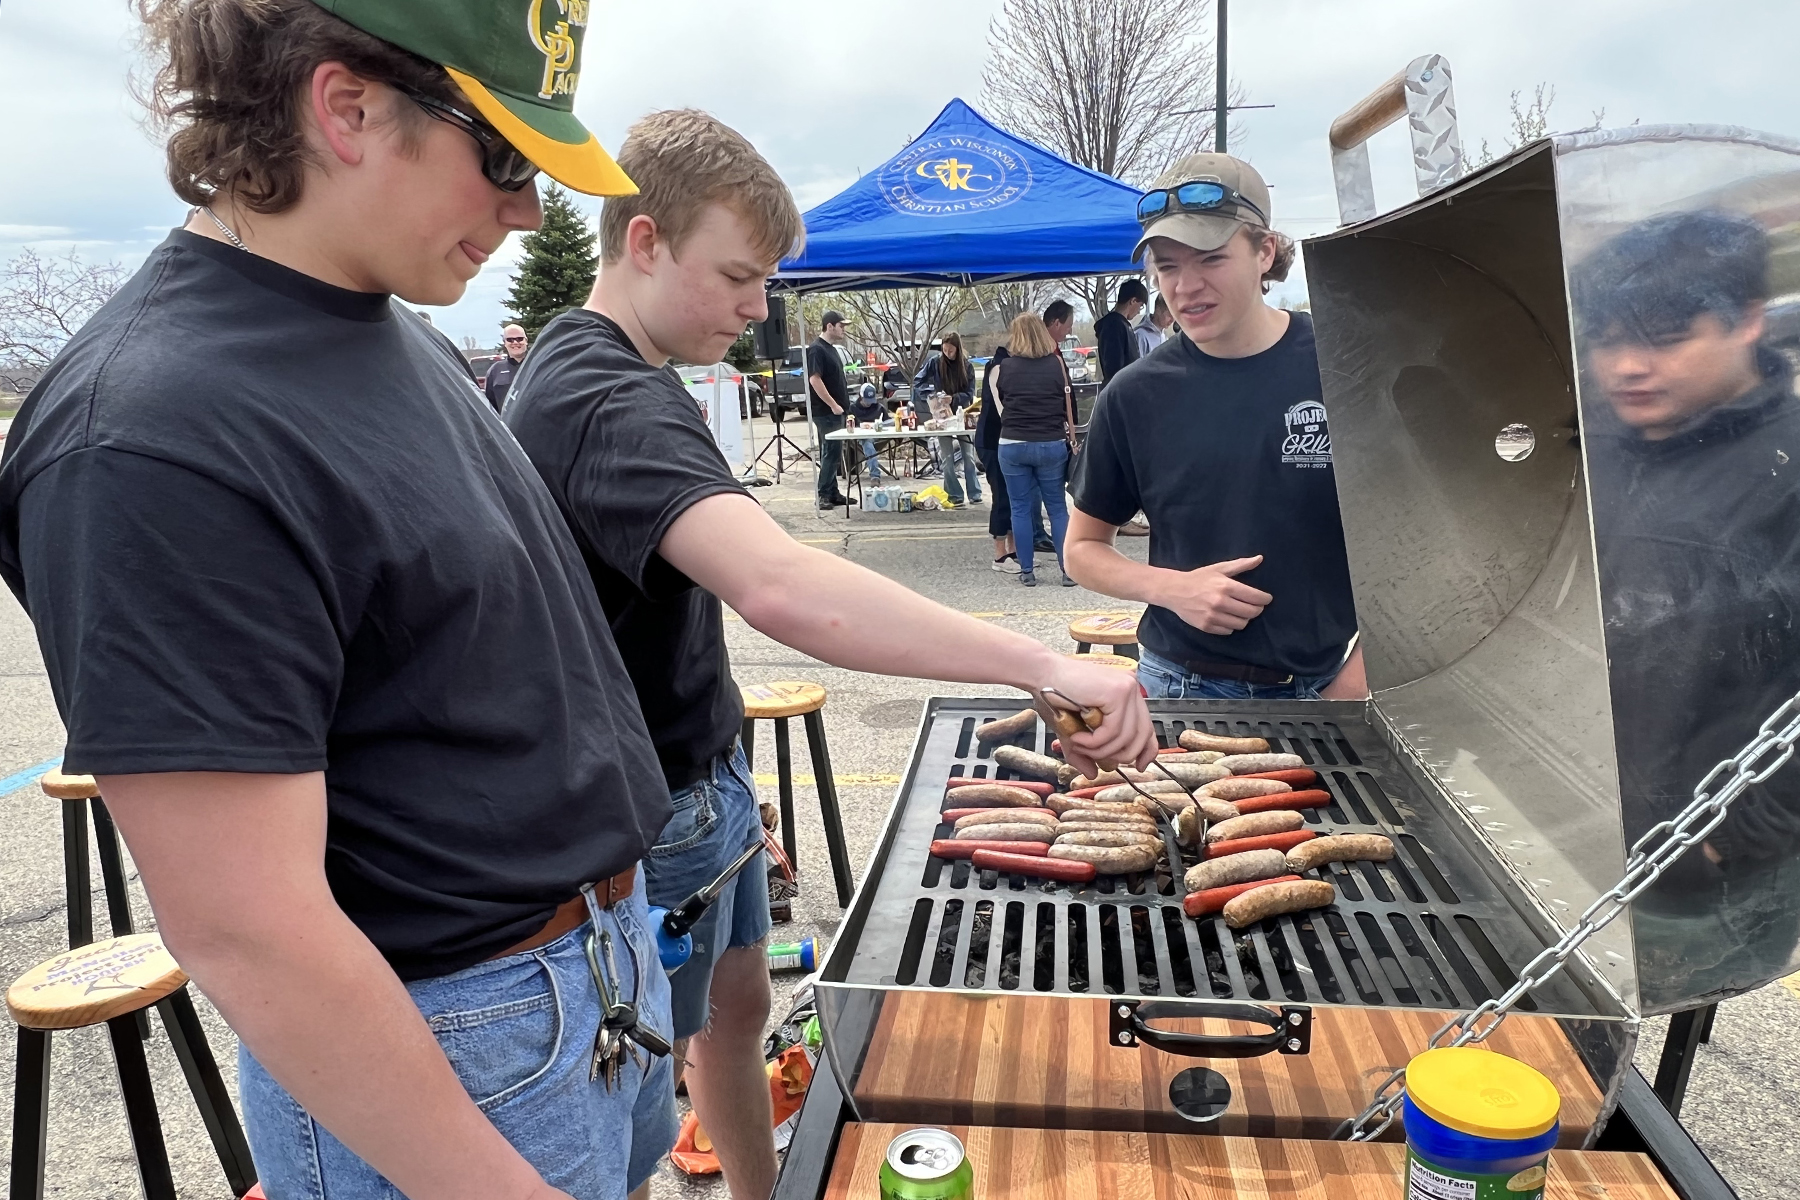 Students grilling brats and burgers at the Project GRILL unveiling event